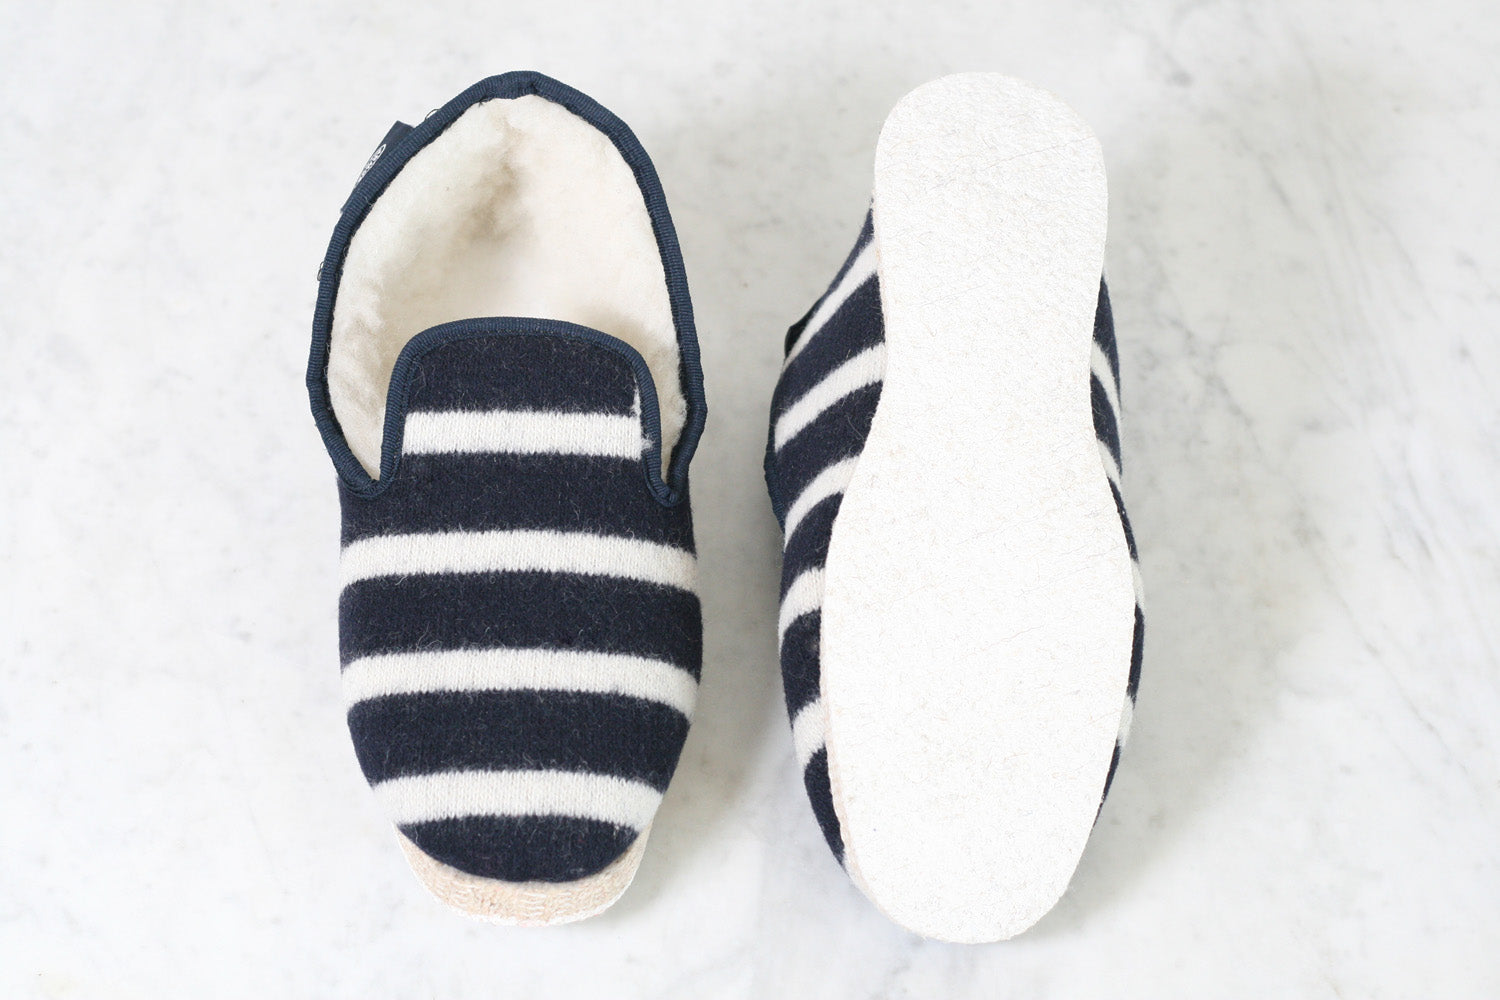 Armor-Lux Wool Slippers